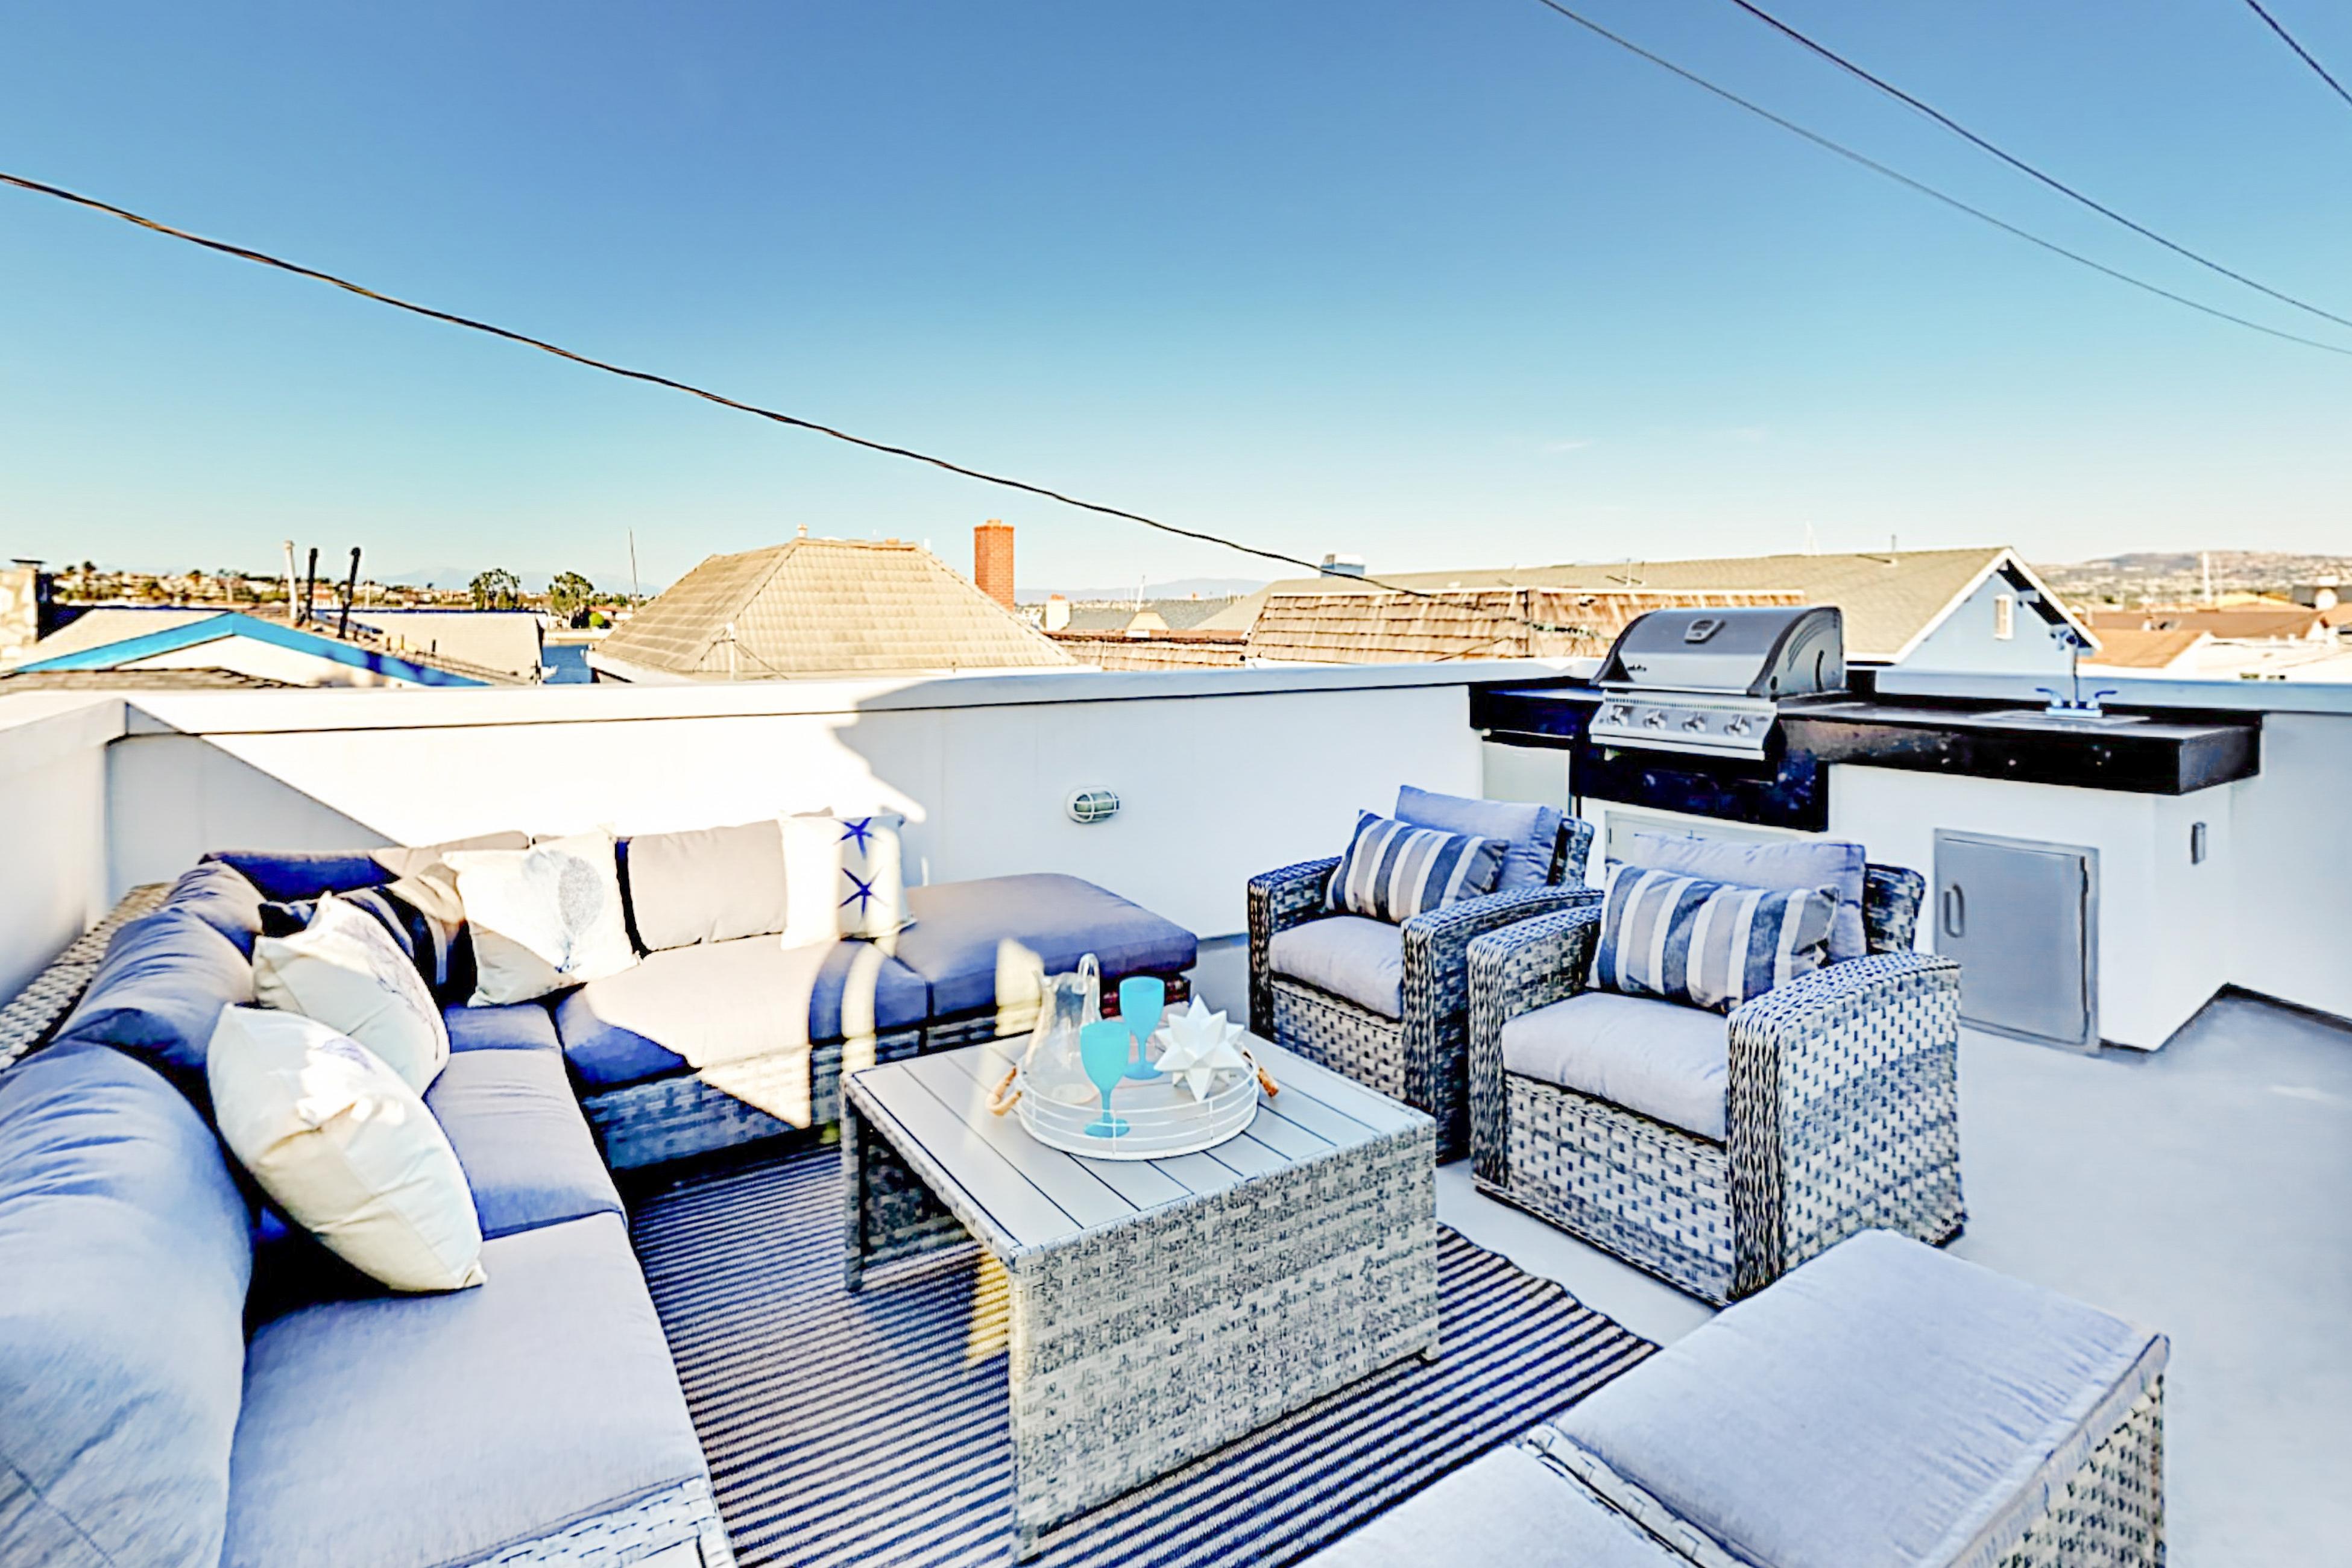 Luxe Balboa Peninsula Condo w Gourmet Kitchen and Epic Rooftop Deck